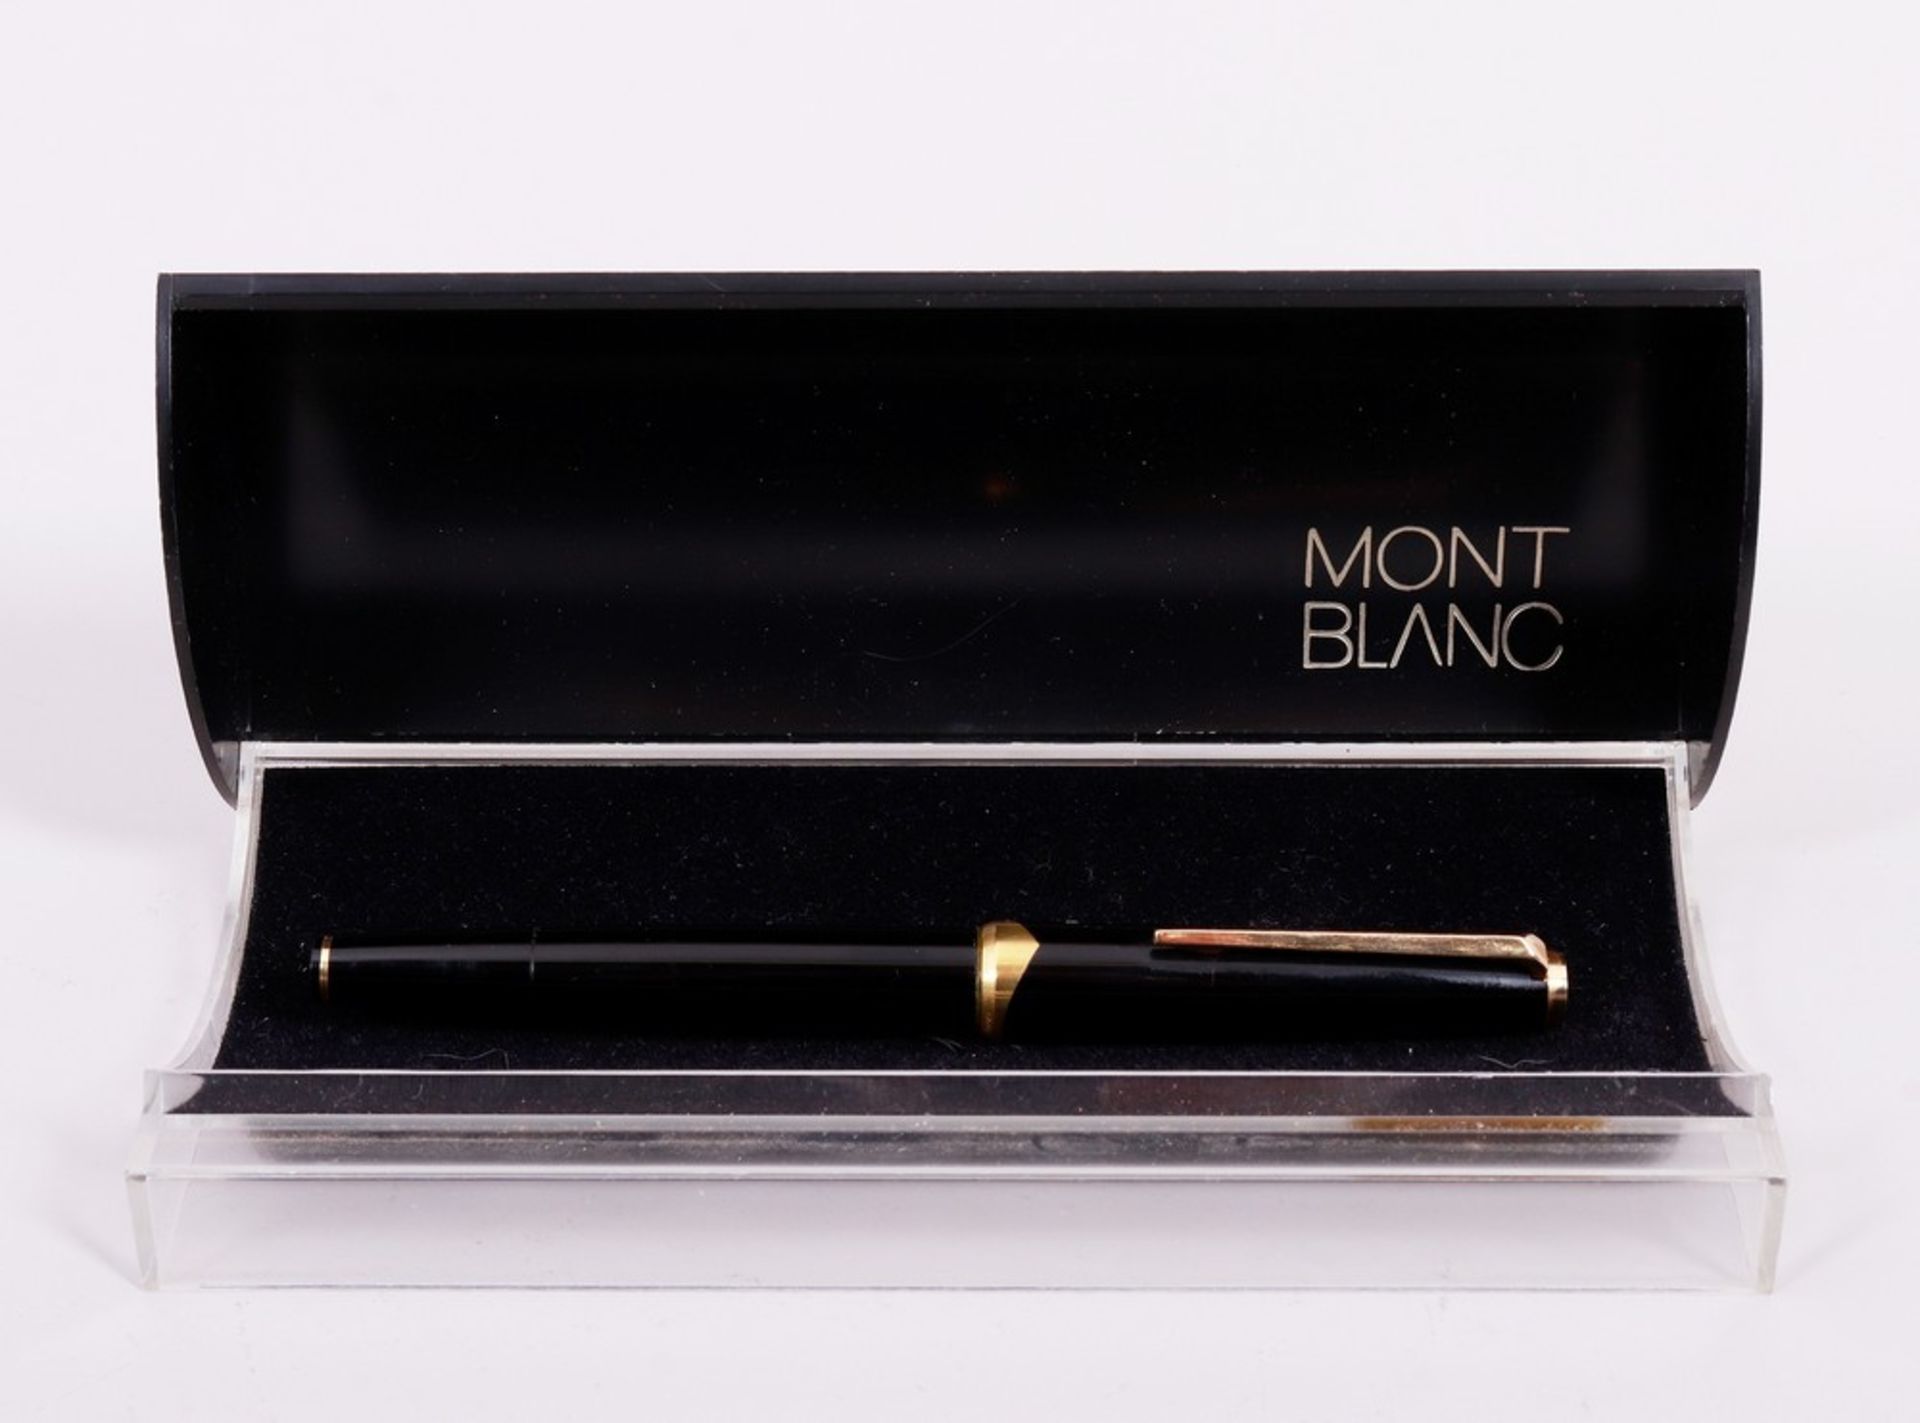 Fountain pen in a case, Montblanc, model "121", 1960s - Image 6 of 6